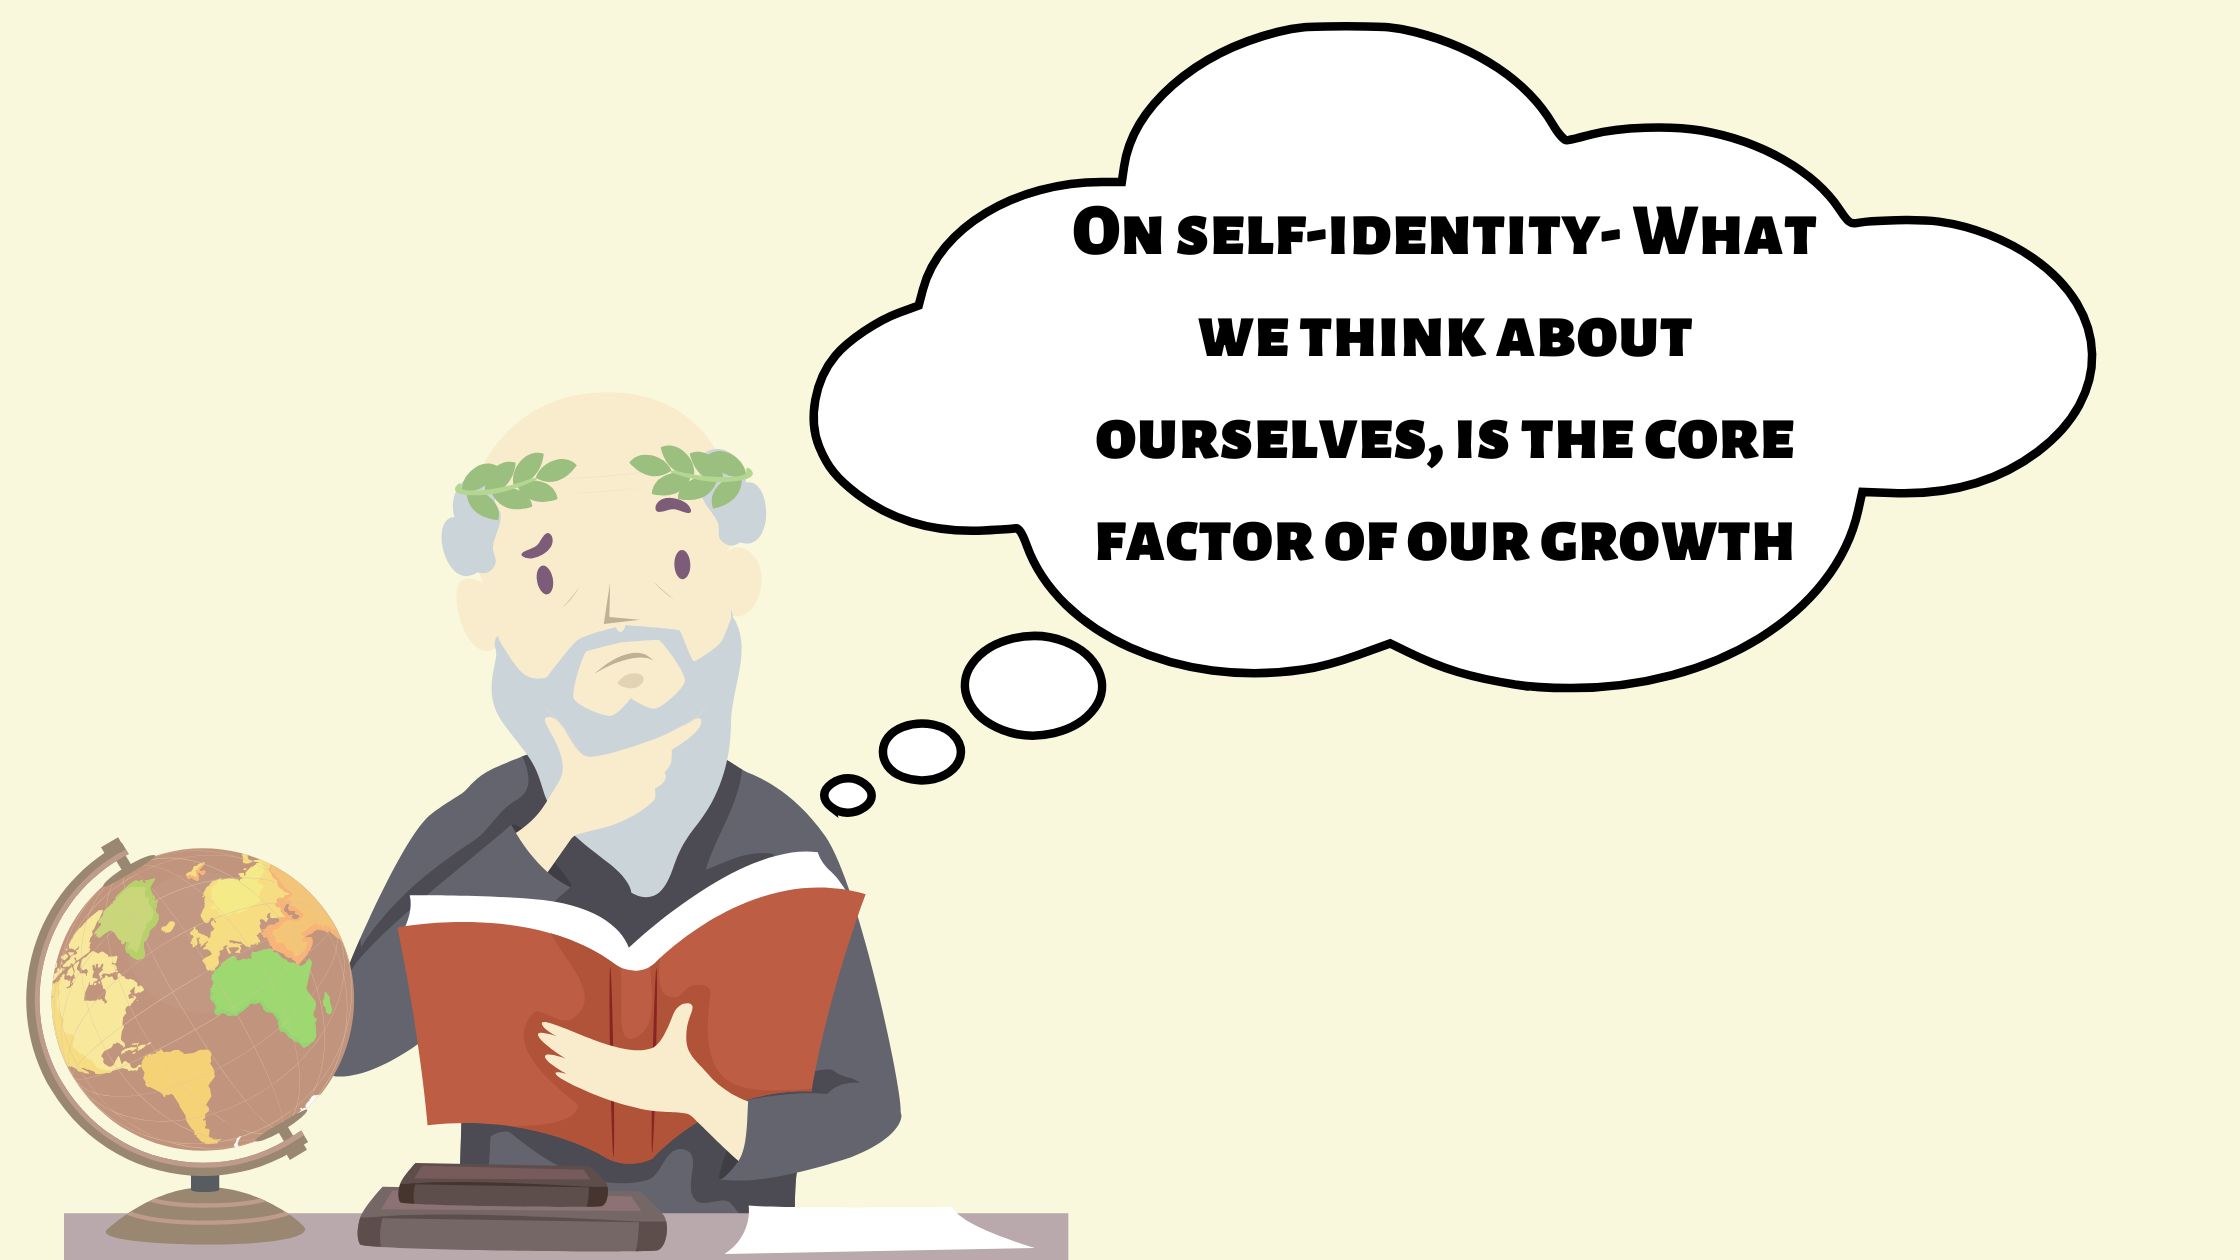 On self-identity- What we think about ourselves, is the core factor of our growth